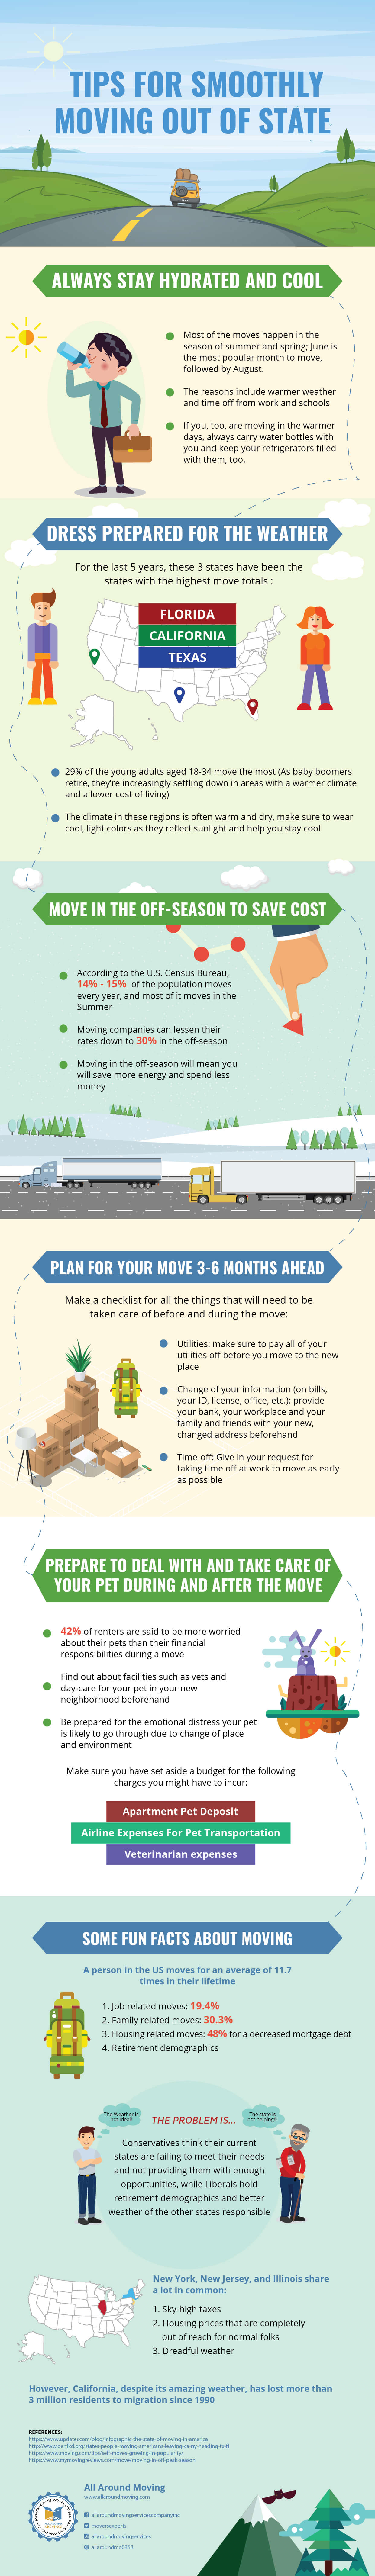 Tip for Smoothly Moving Out of State [Infographic]